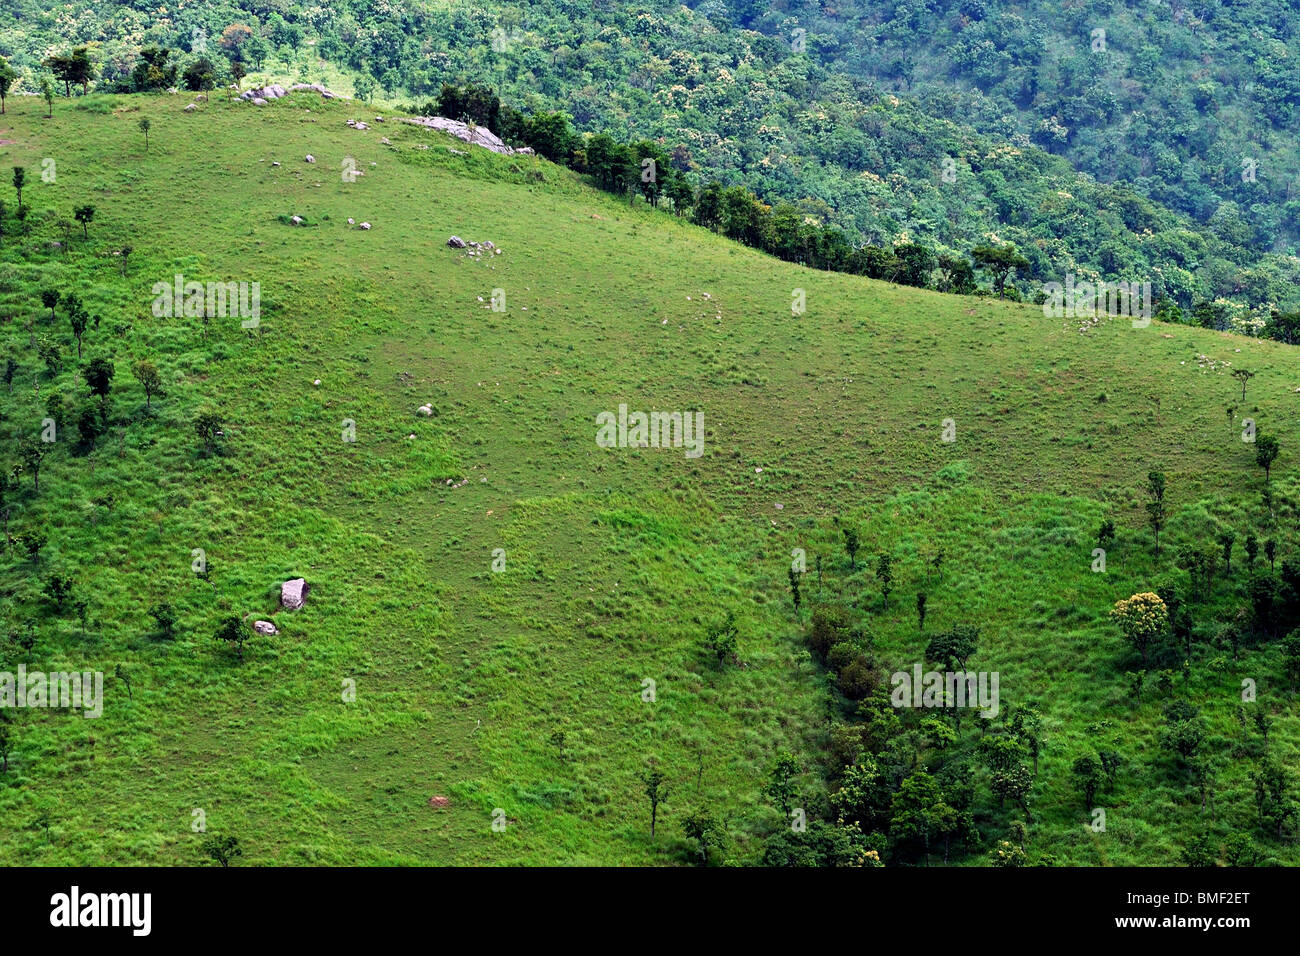 Hill tops and Valleys in Tamilnadu landscape scenic Stock Photo